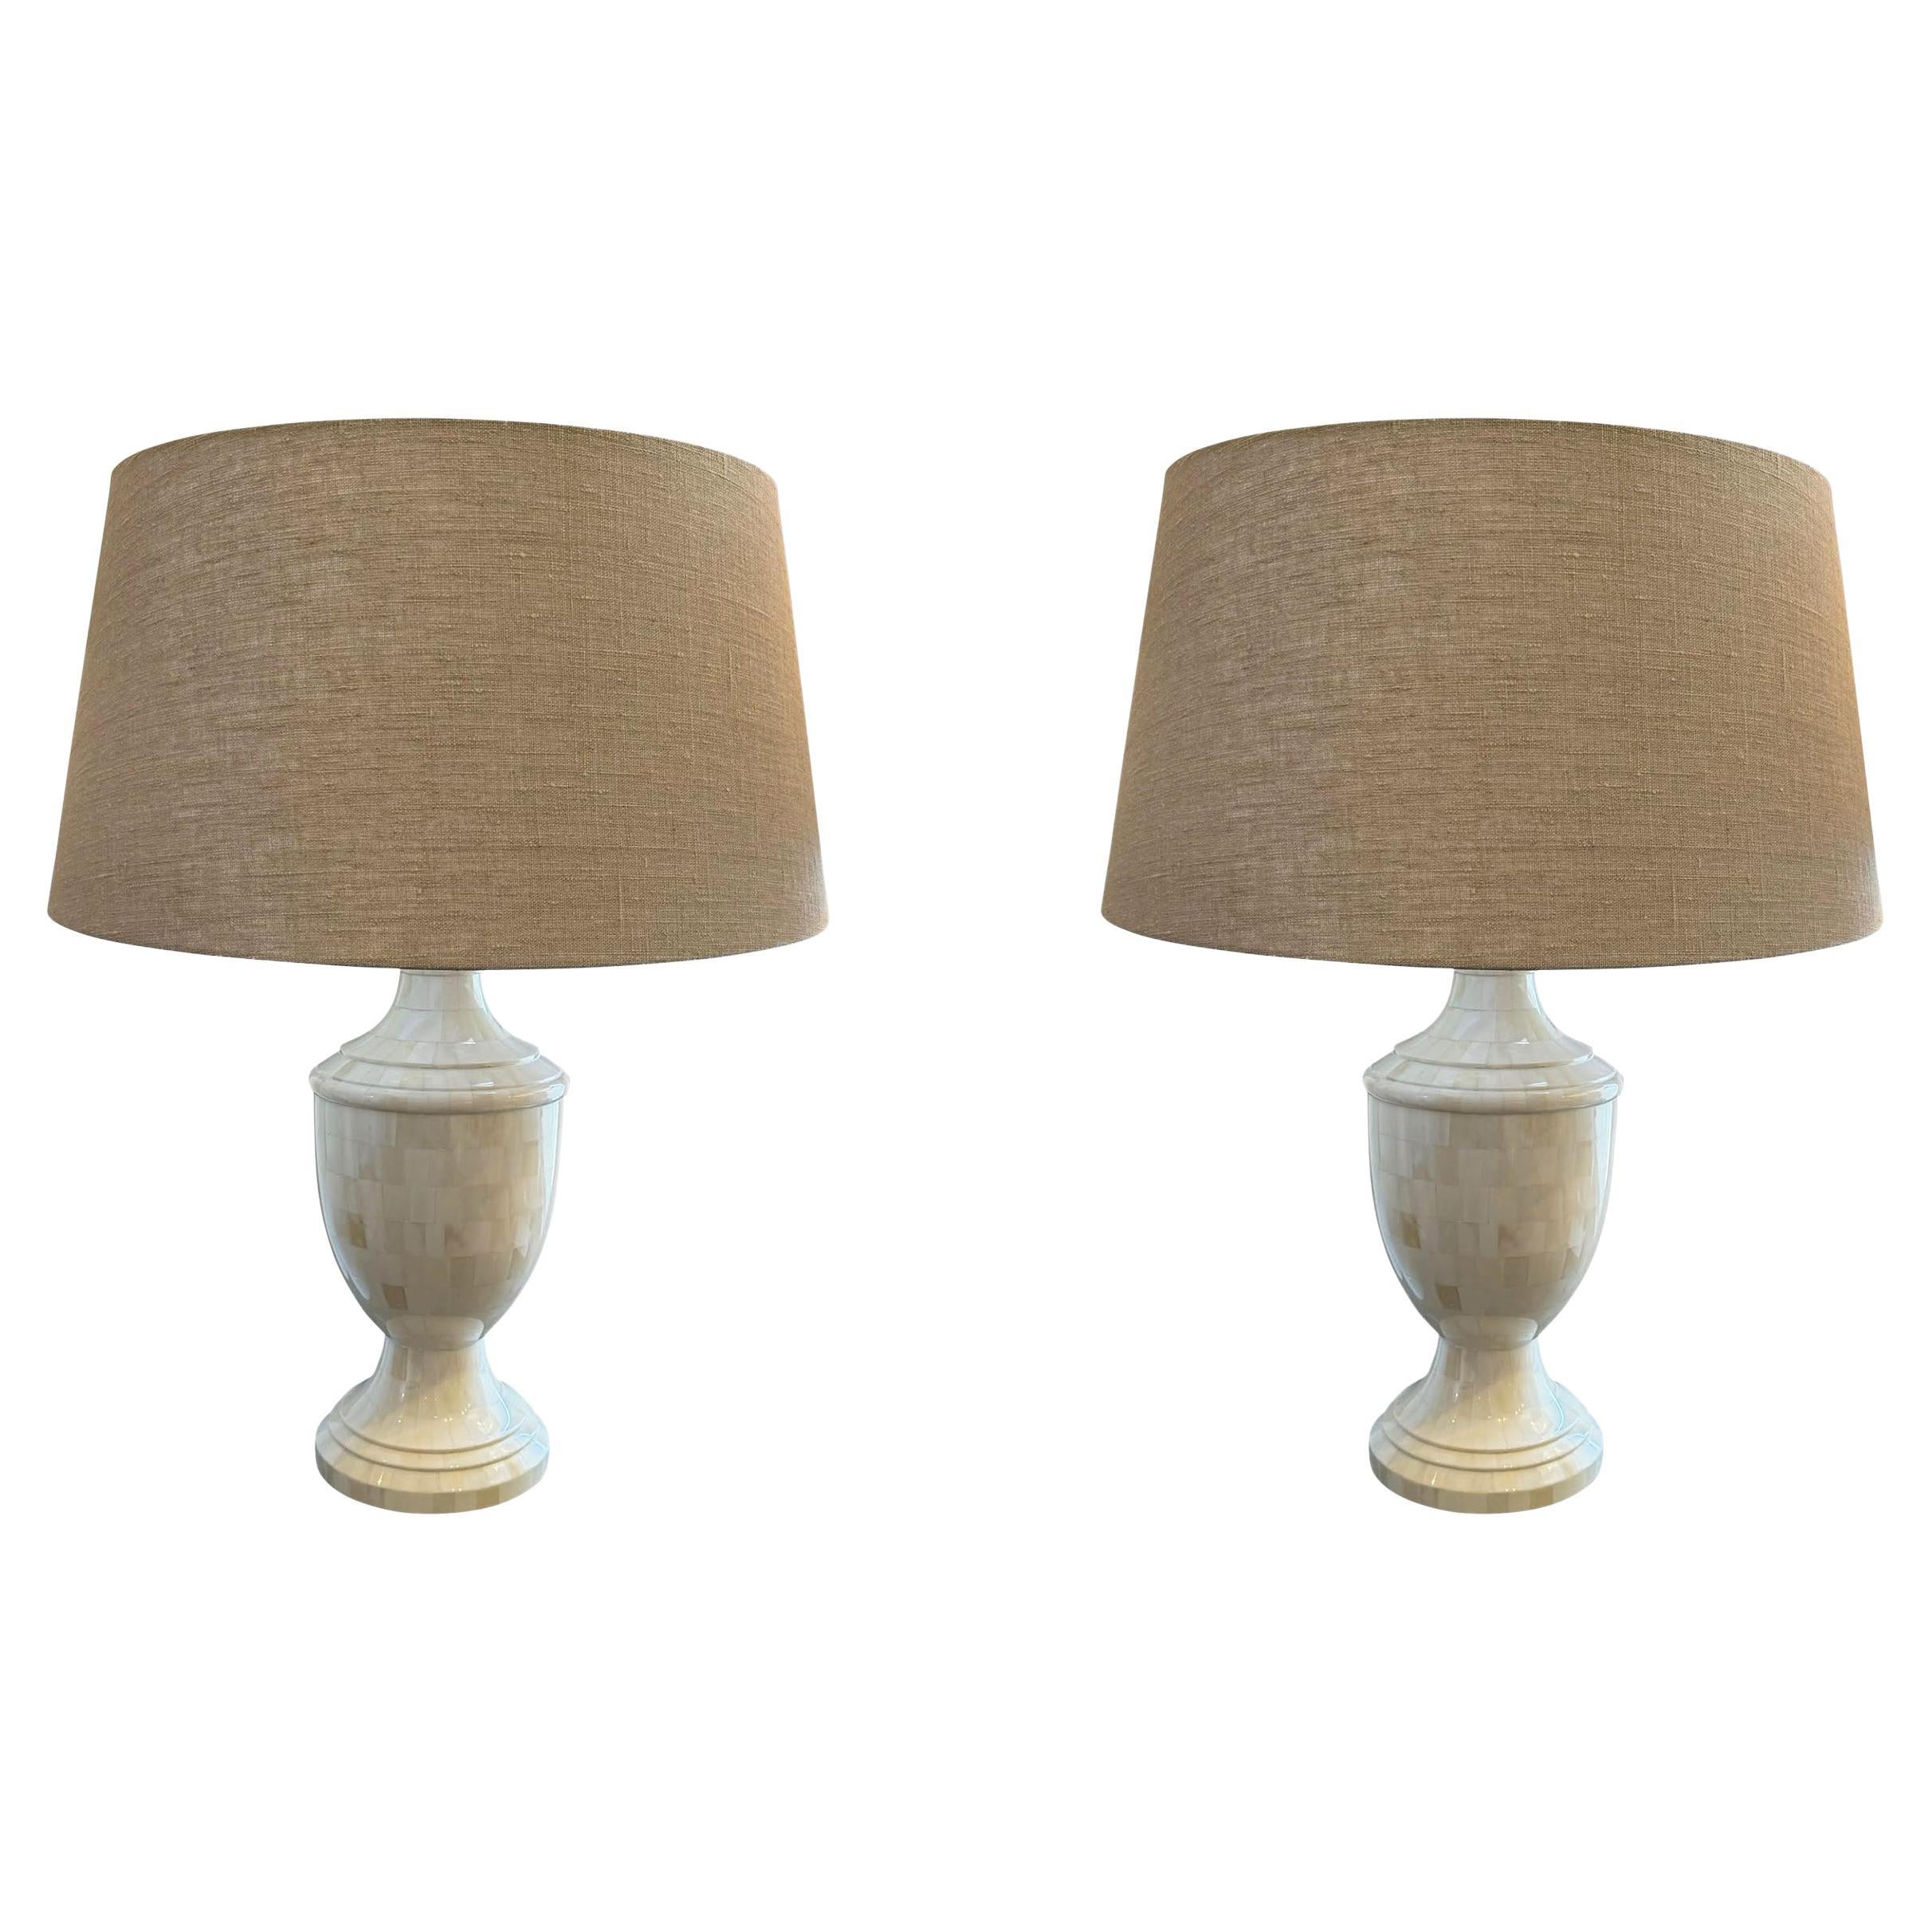 Cream Bone Finial Shaped Lamps With Shades, Indonesia, Contemporary For Sale